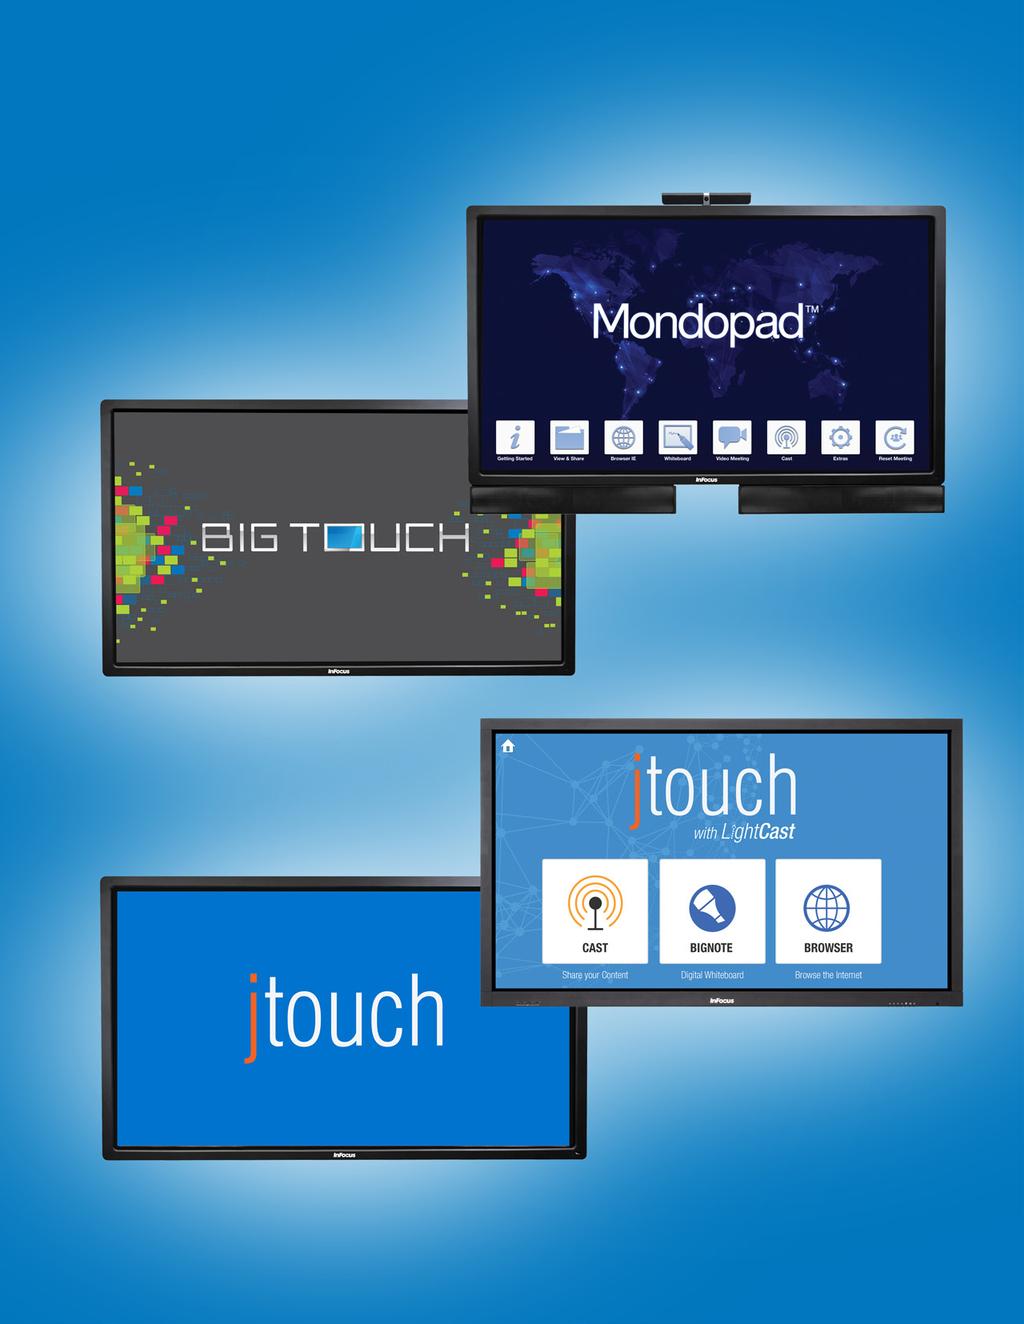 InFocus Solutions Mondopad Touchscreen collaboration solution for video conferencing, whiteboarding and more BigTouch Touchscreen with built-in Win8 PC JTouch Whiteboard with LightCast Touchscreen